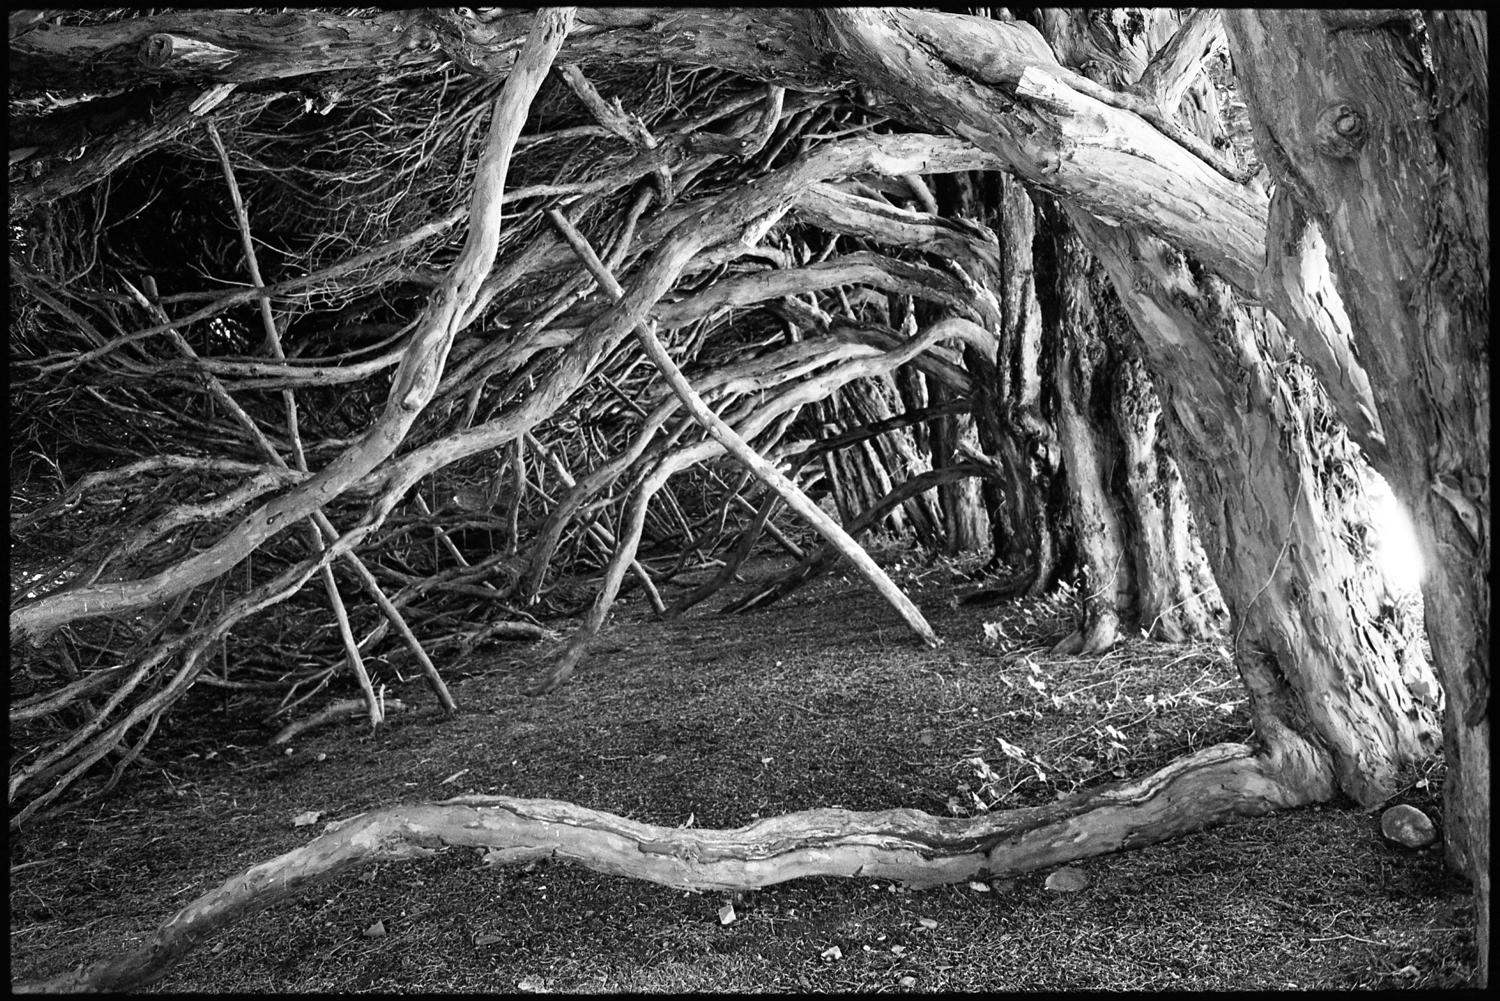 Paul Cooklin Black and White Photograph - Edition 1/10 - Tree Roots and Branches, Silver Gelatin Photograph